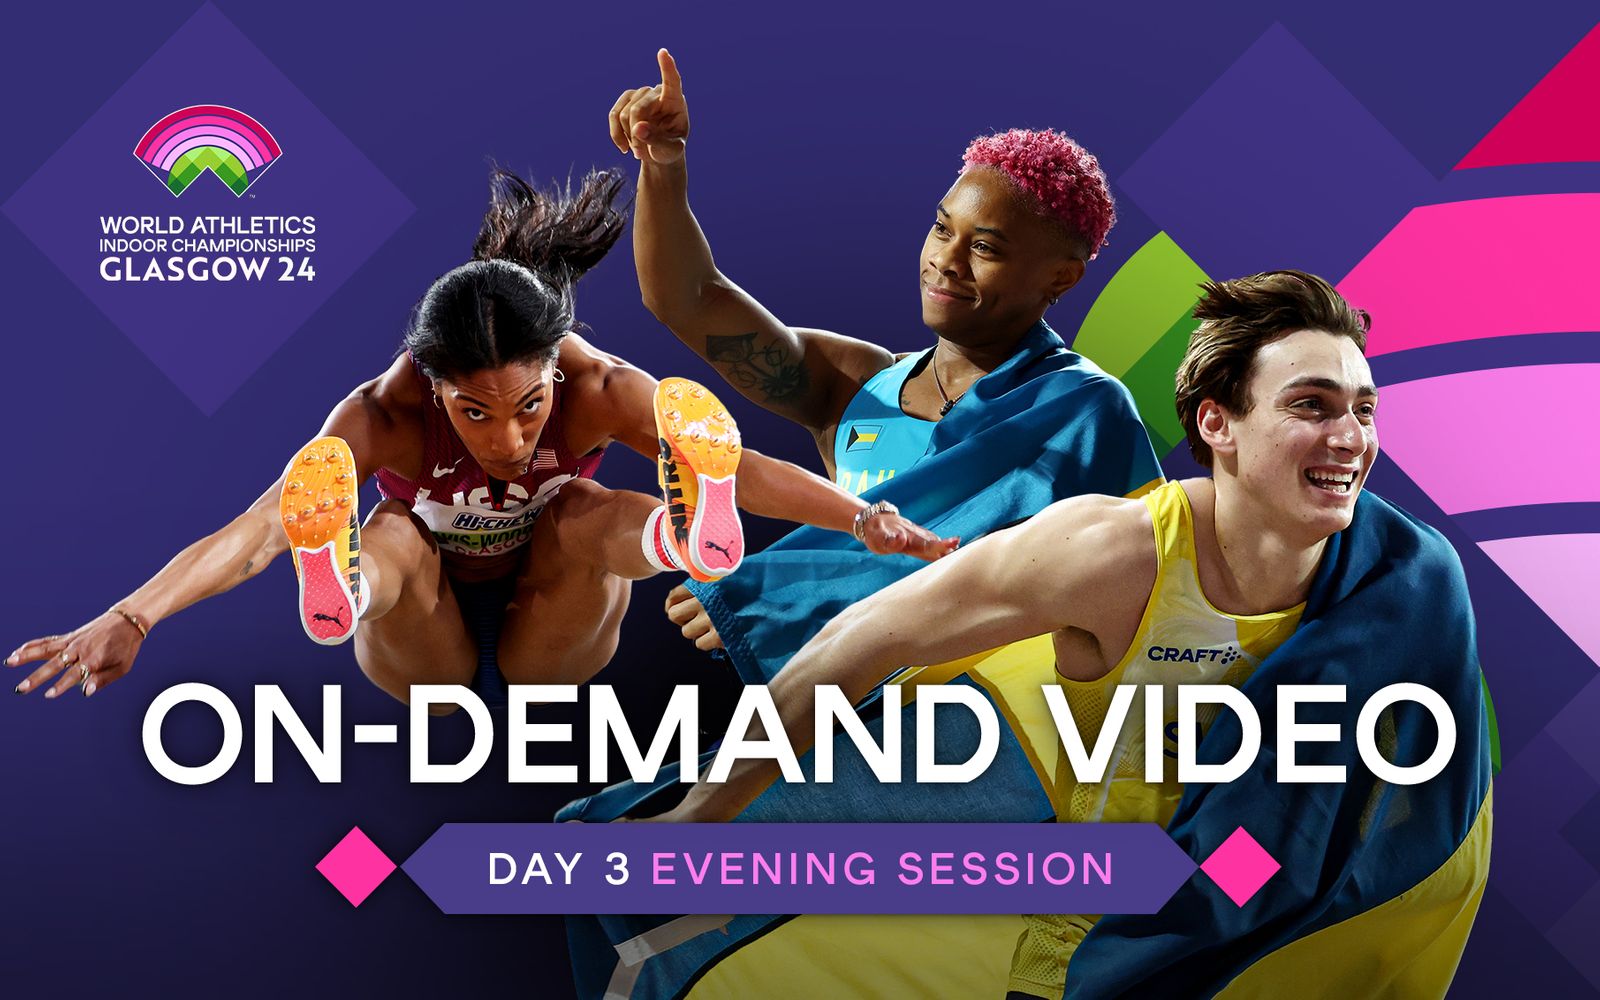 Watch again – World Athletics Indoor Championships, Day 3 Evening Session, Watch